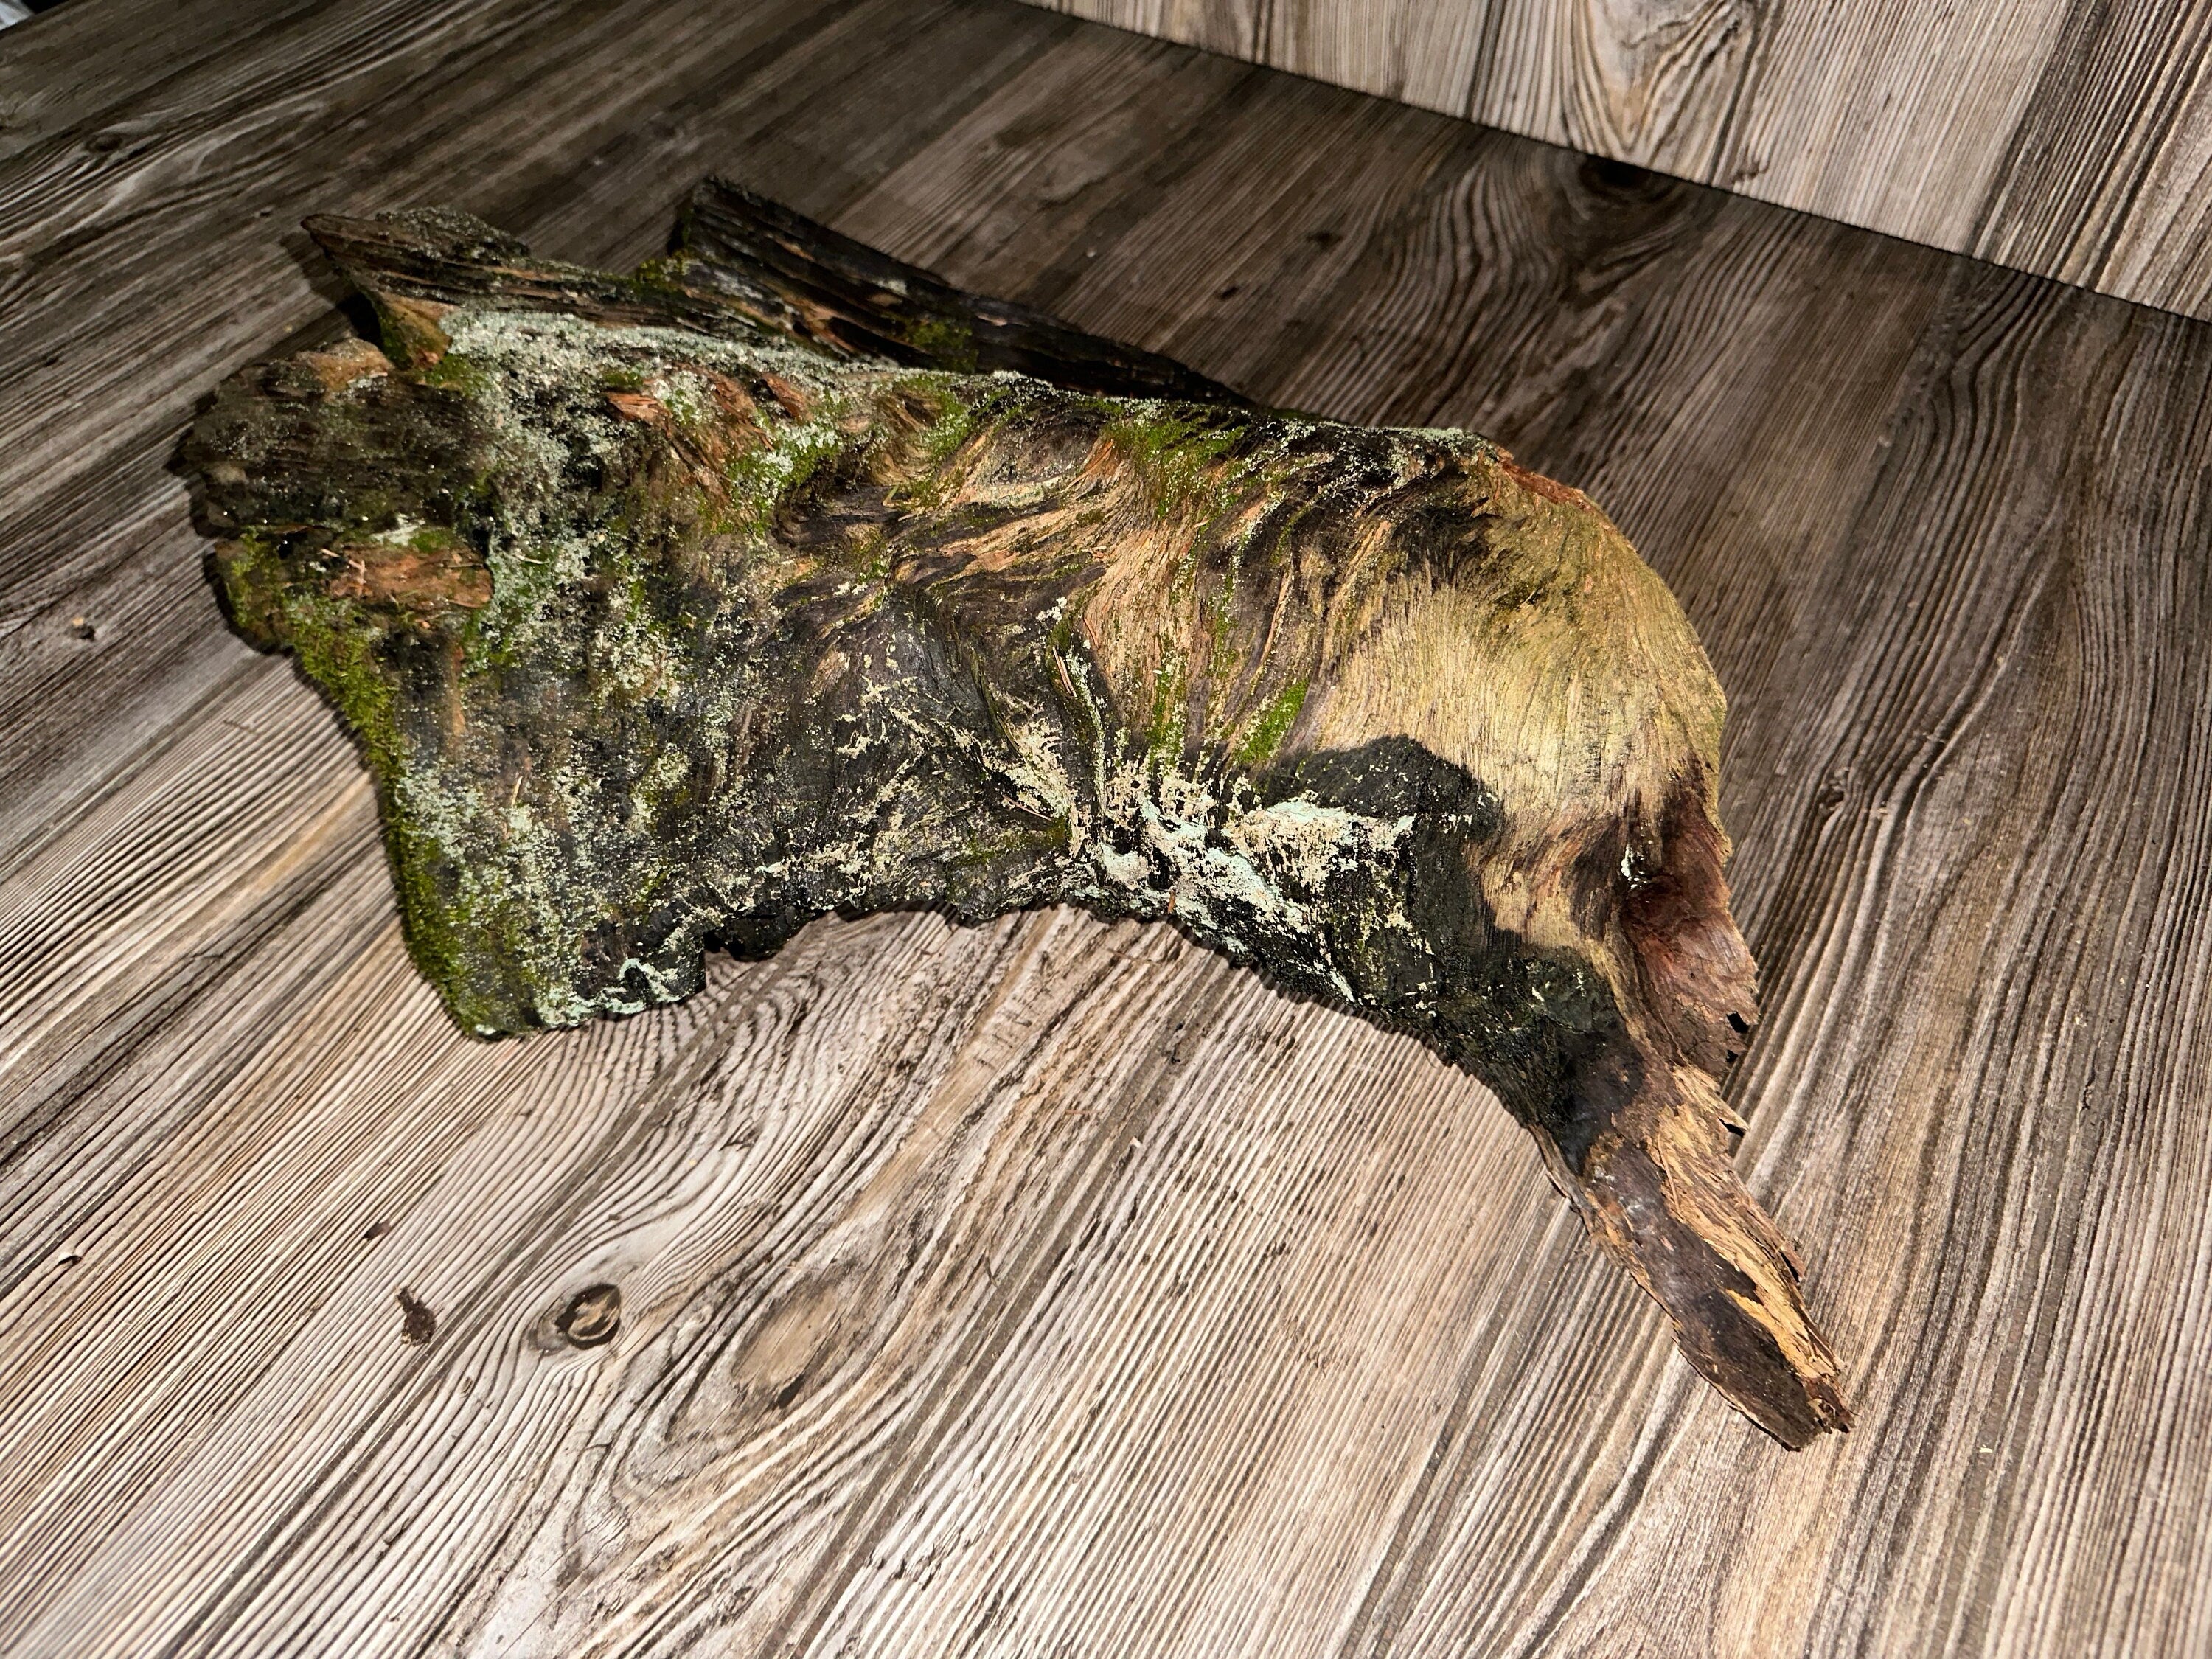 Moss Driftwood, Mossy Driftwood, 19 Inches Long by 11 Inches Wide and 5.5 Inches High